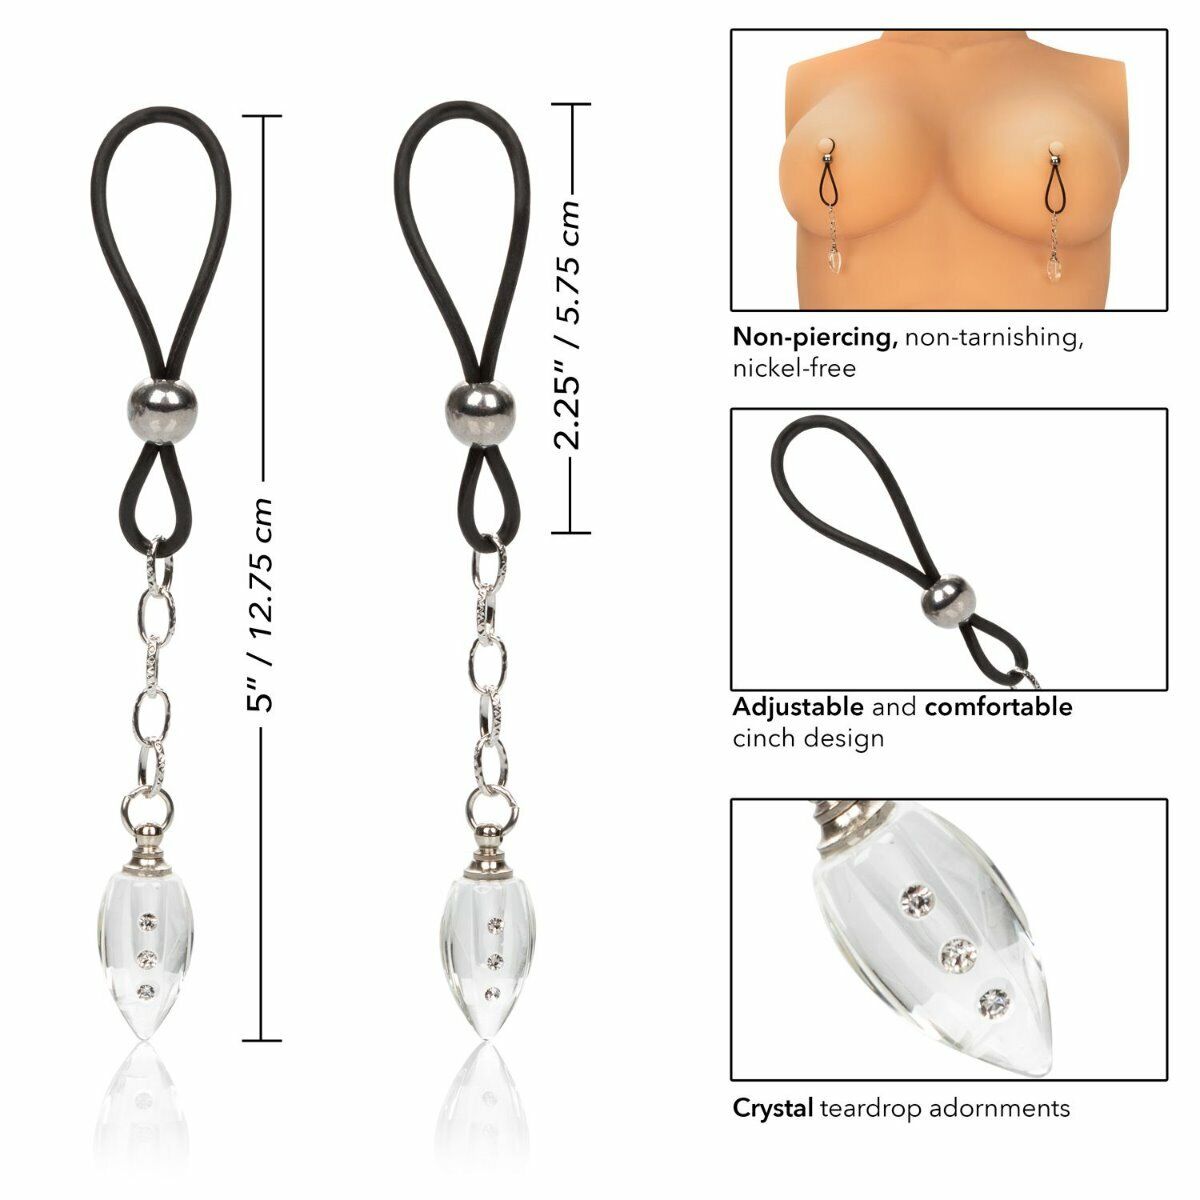 Nipple Play Non-Piercing Nipple Clamps Body Jewelry Bondage Sex Toy for Couples